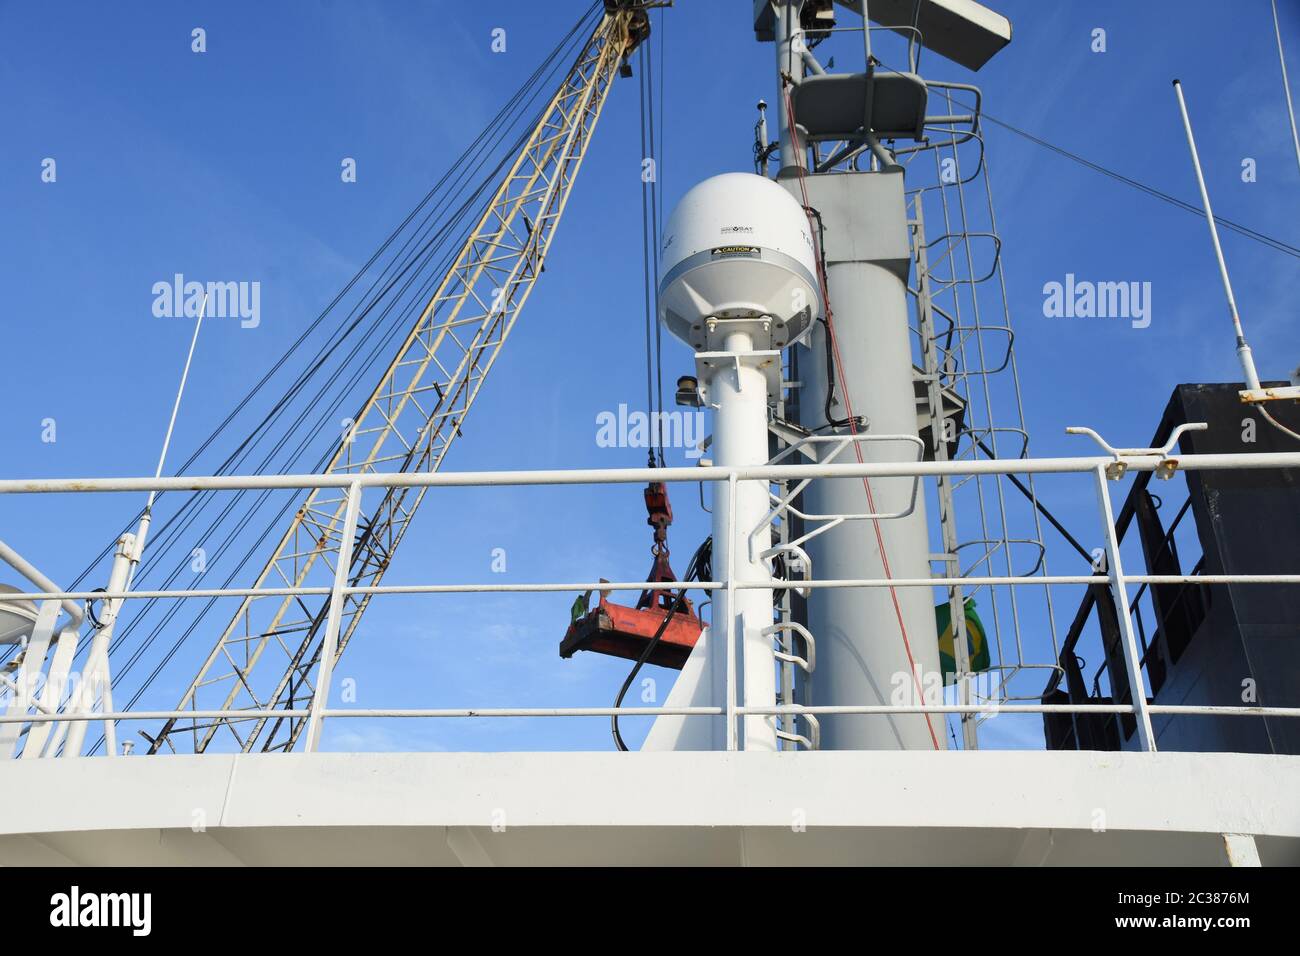 Satellite antenna with radar mast of the merchant ship with the loading crane in background during cargo operations when vessel in the port Stock Photo